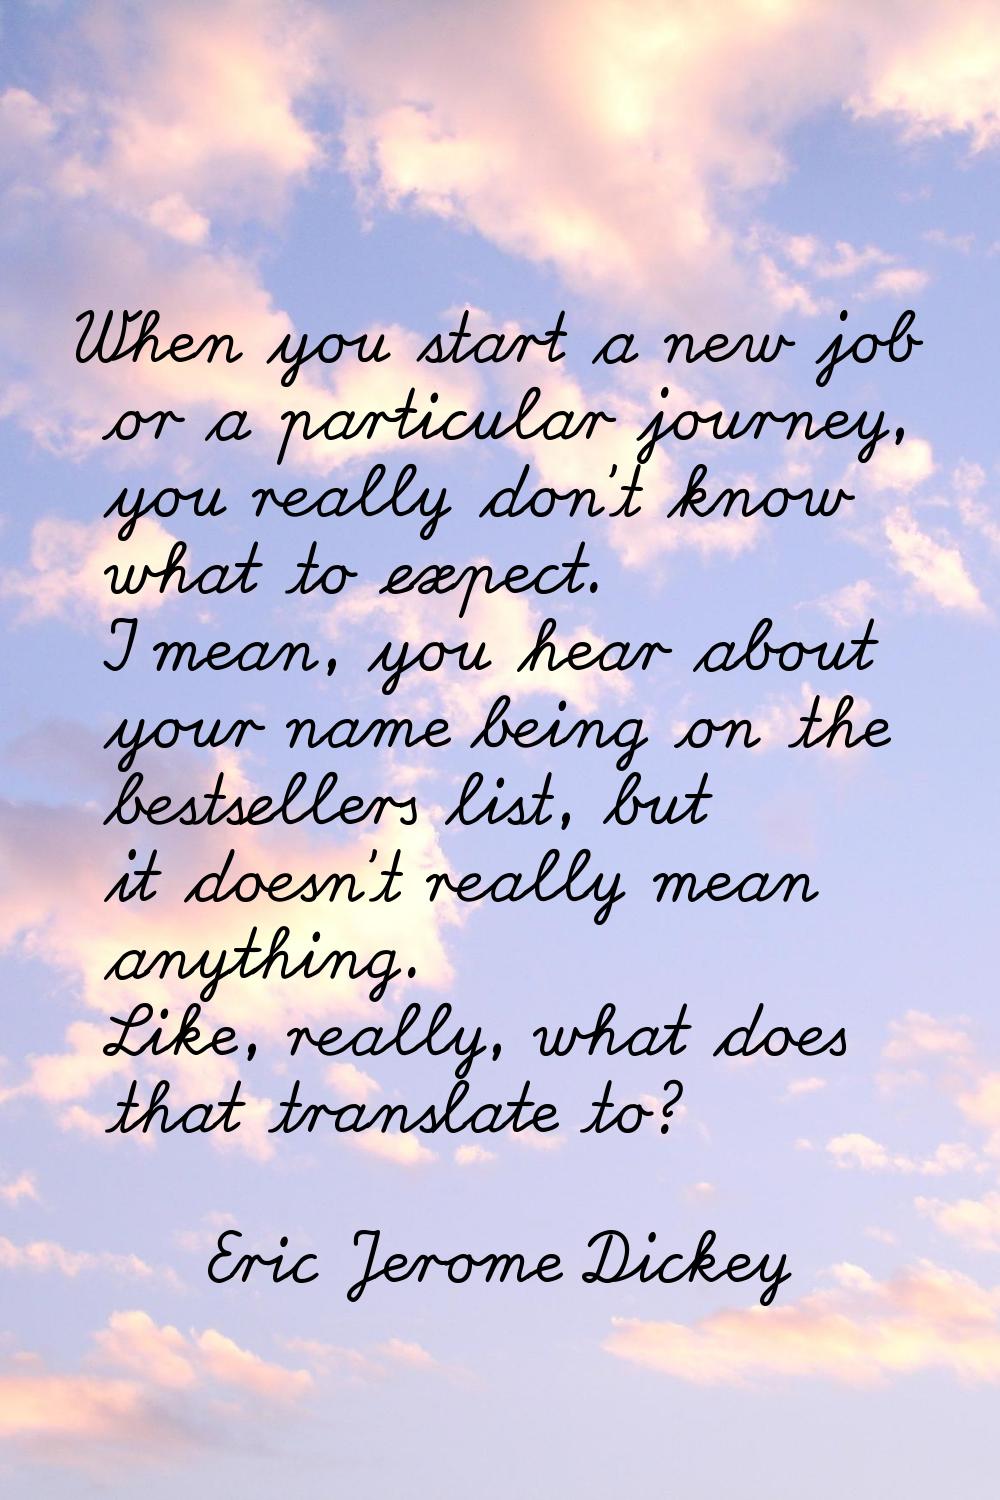 When you start a new job or a particular journey, you really don't know what to expect. I mean, you